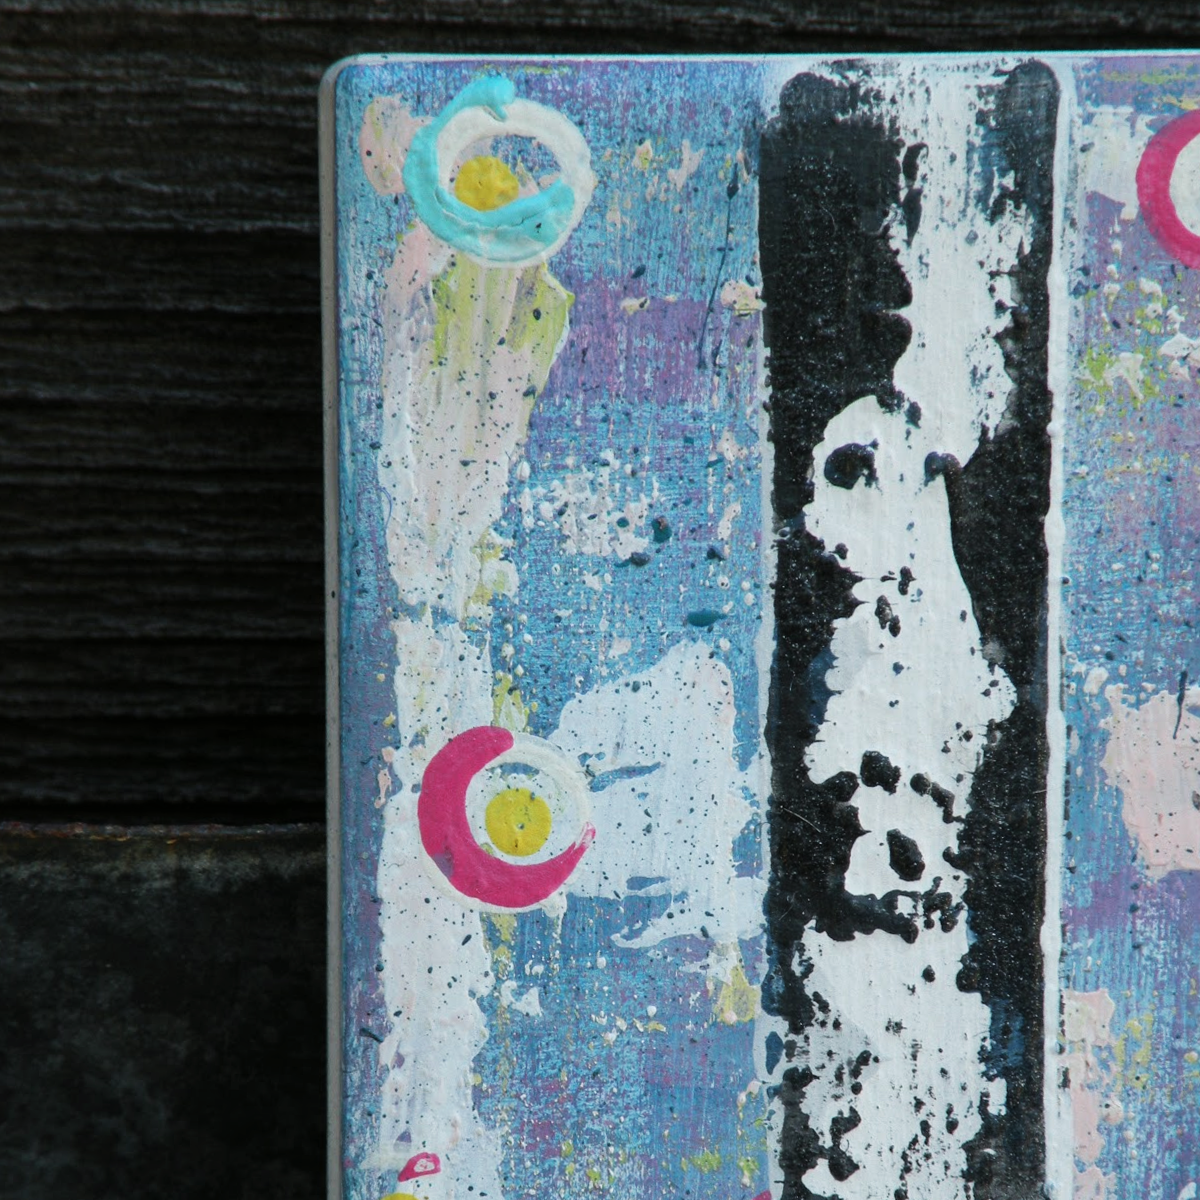 Multi-clipse - Original Painting on Upcycled Tile